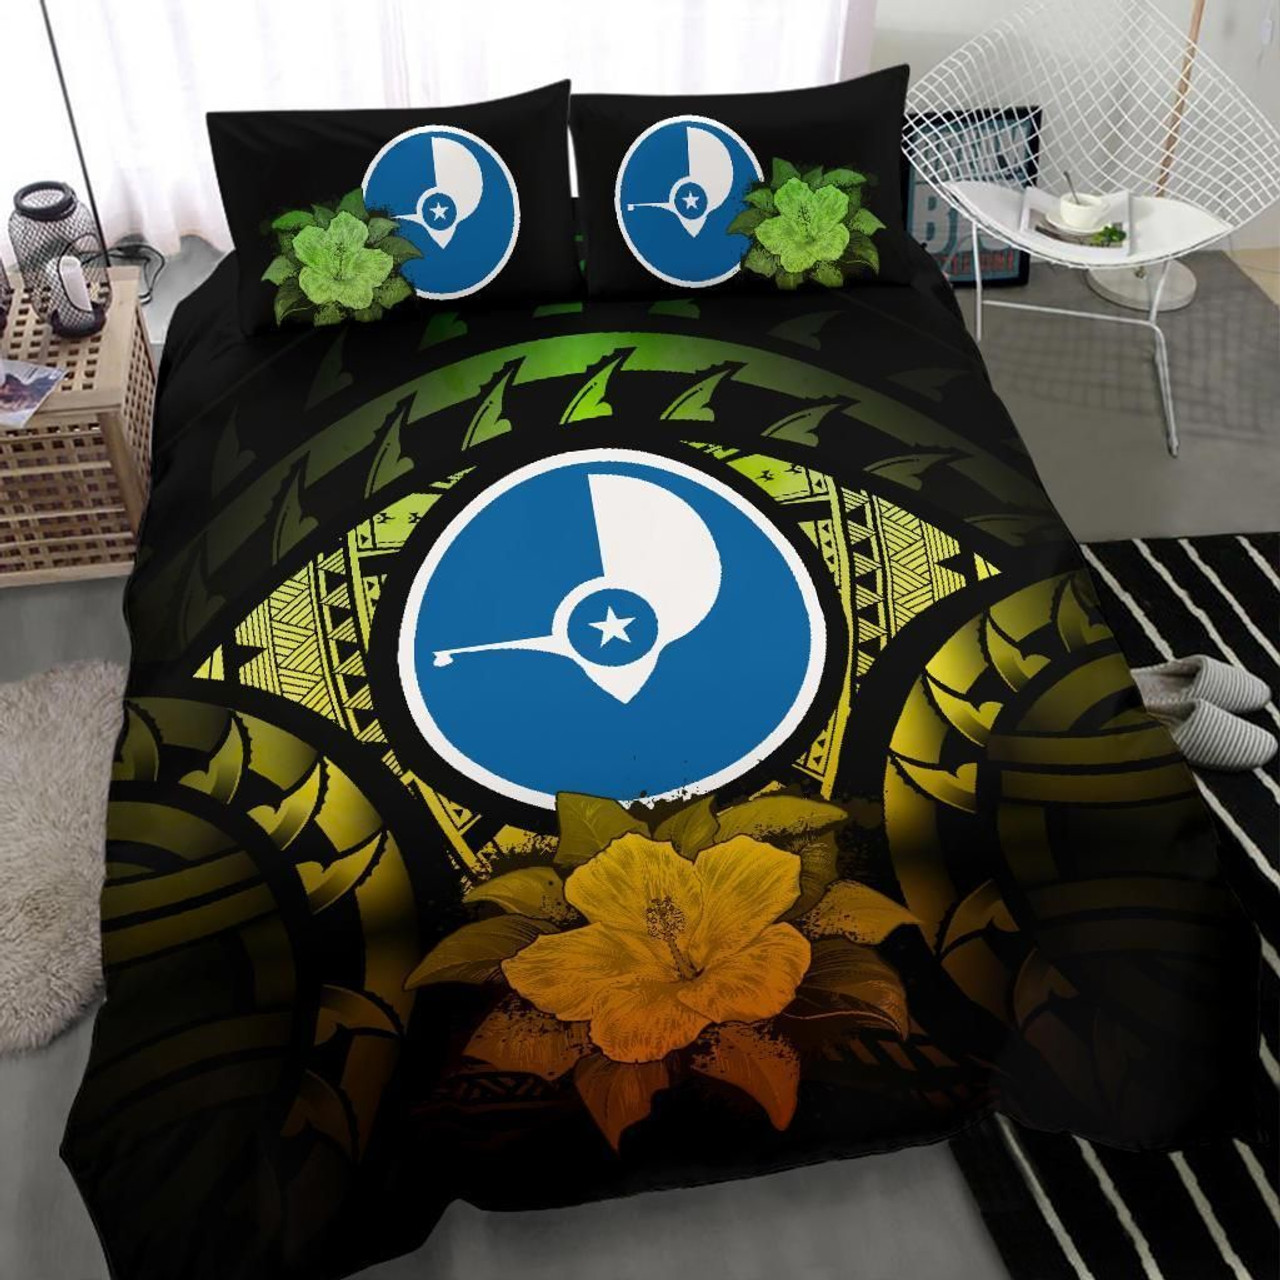 Polynesian Bedding Set - Federated States Of Micronesia Duvet Cover Set Tropical Flowers 6